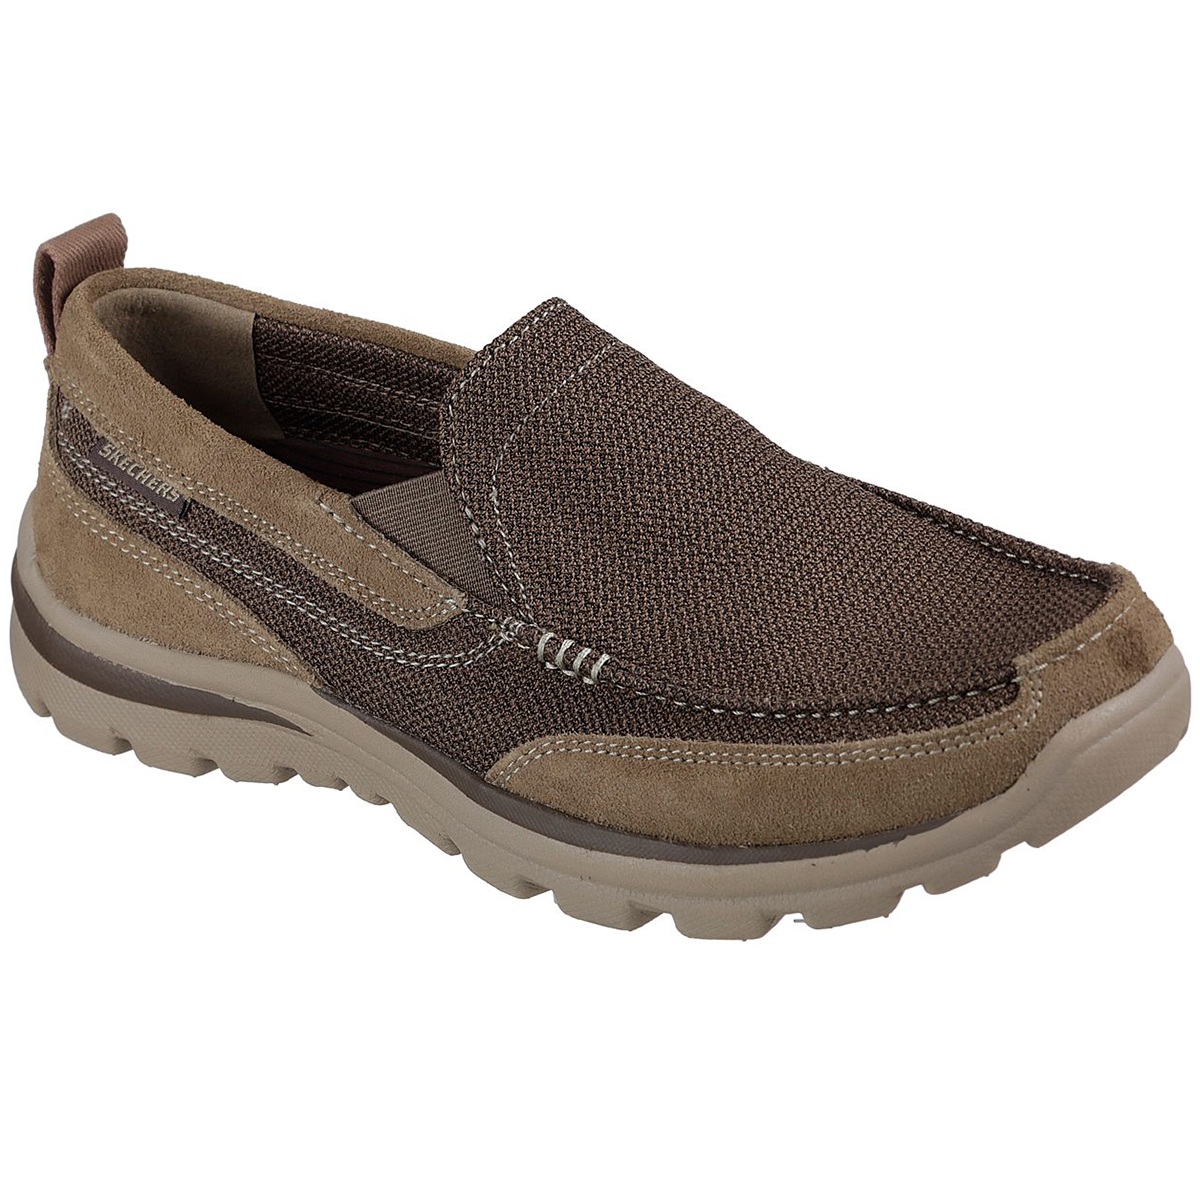 Skechers Men's Relaxed Fit: Superior- Milford Slip-On Shoes - Brown, 8.5